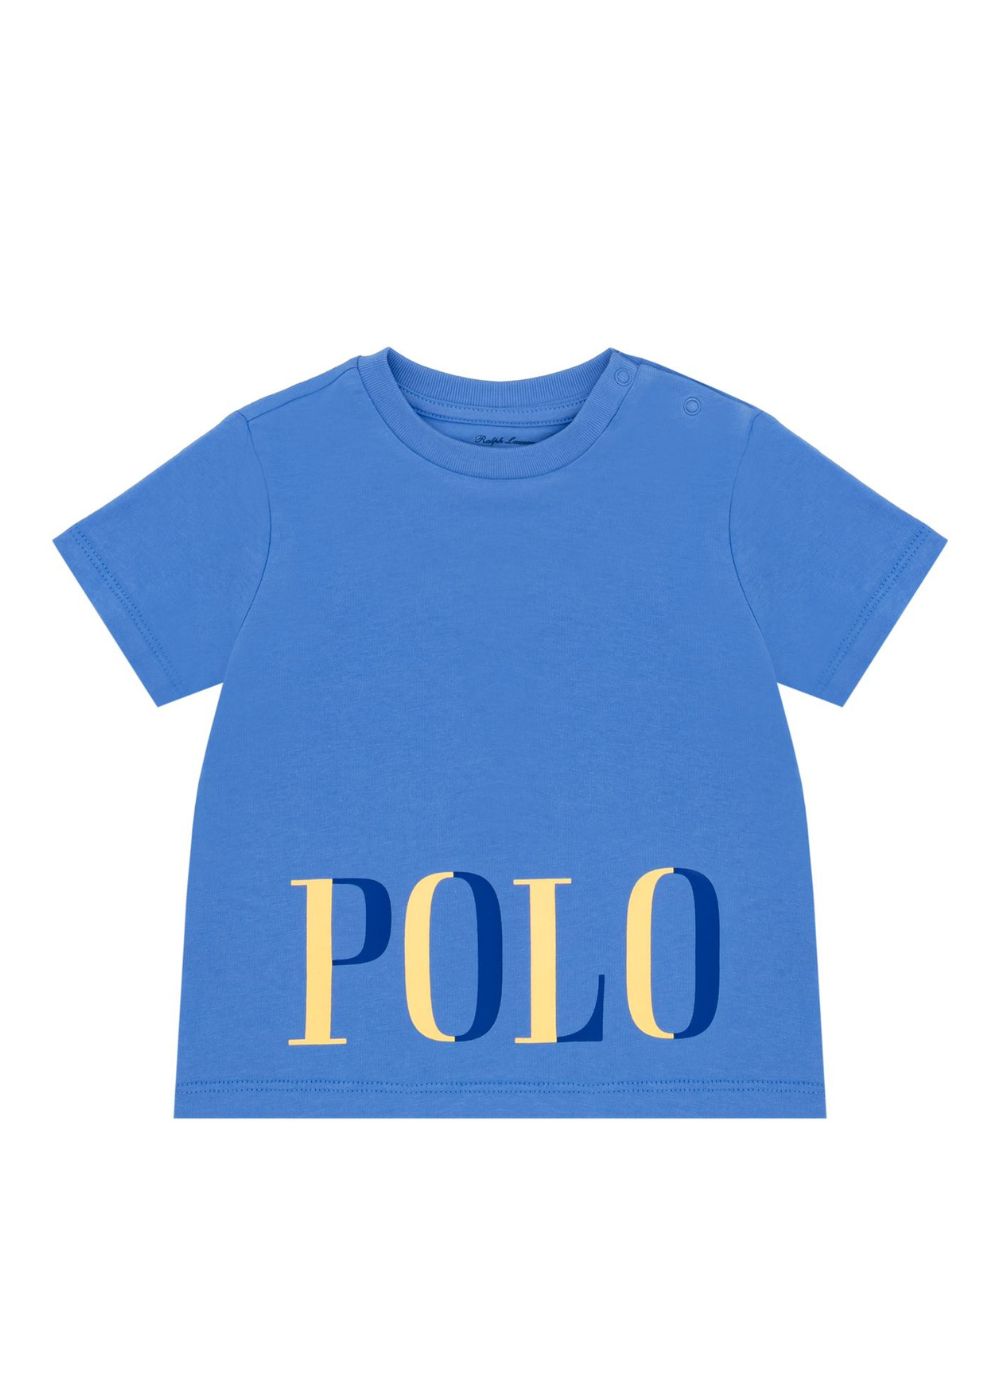 Featured image for “Polo Ralph Lauren T-shirt con logo”